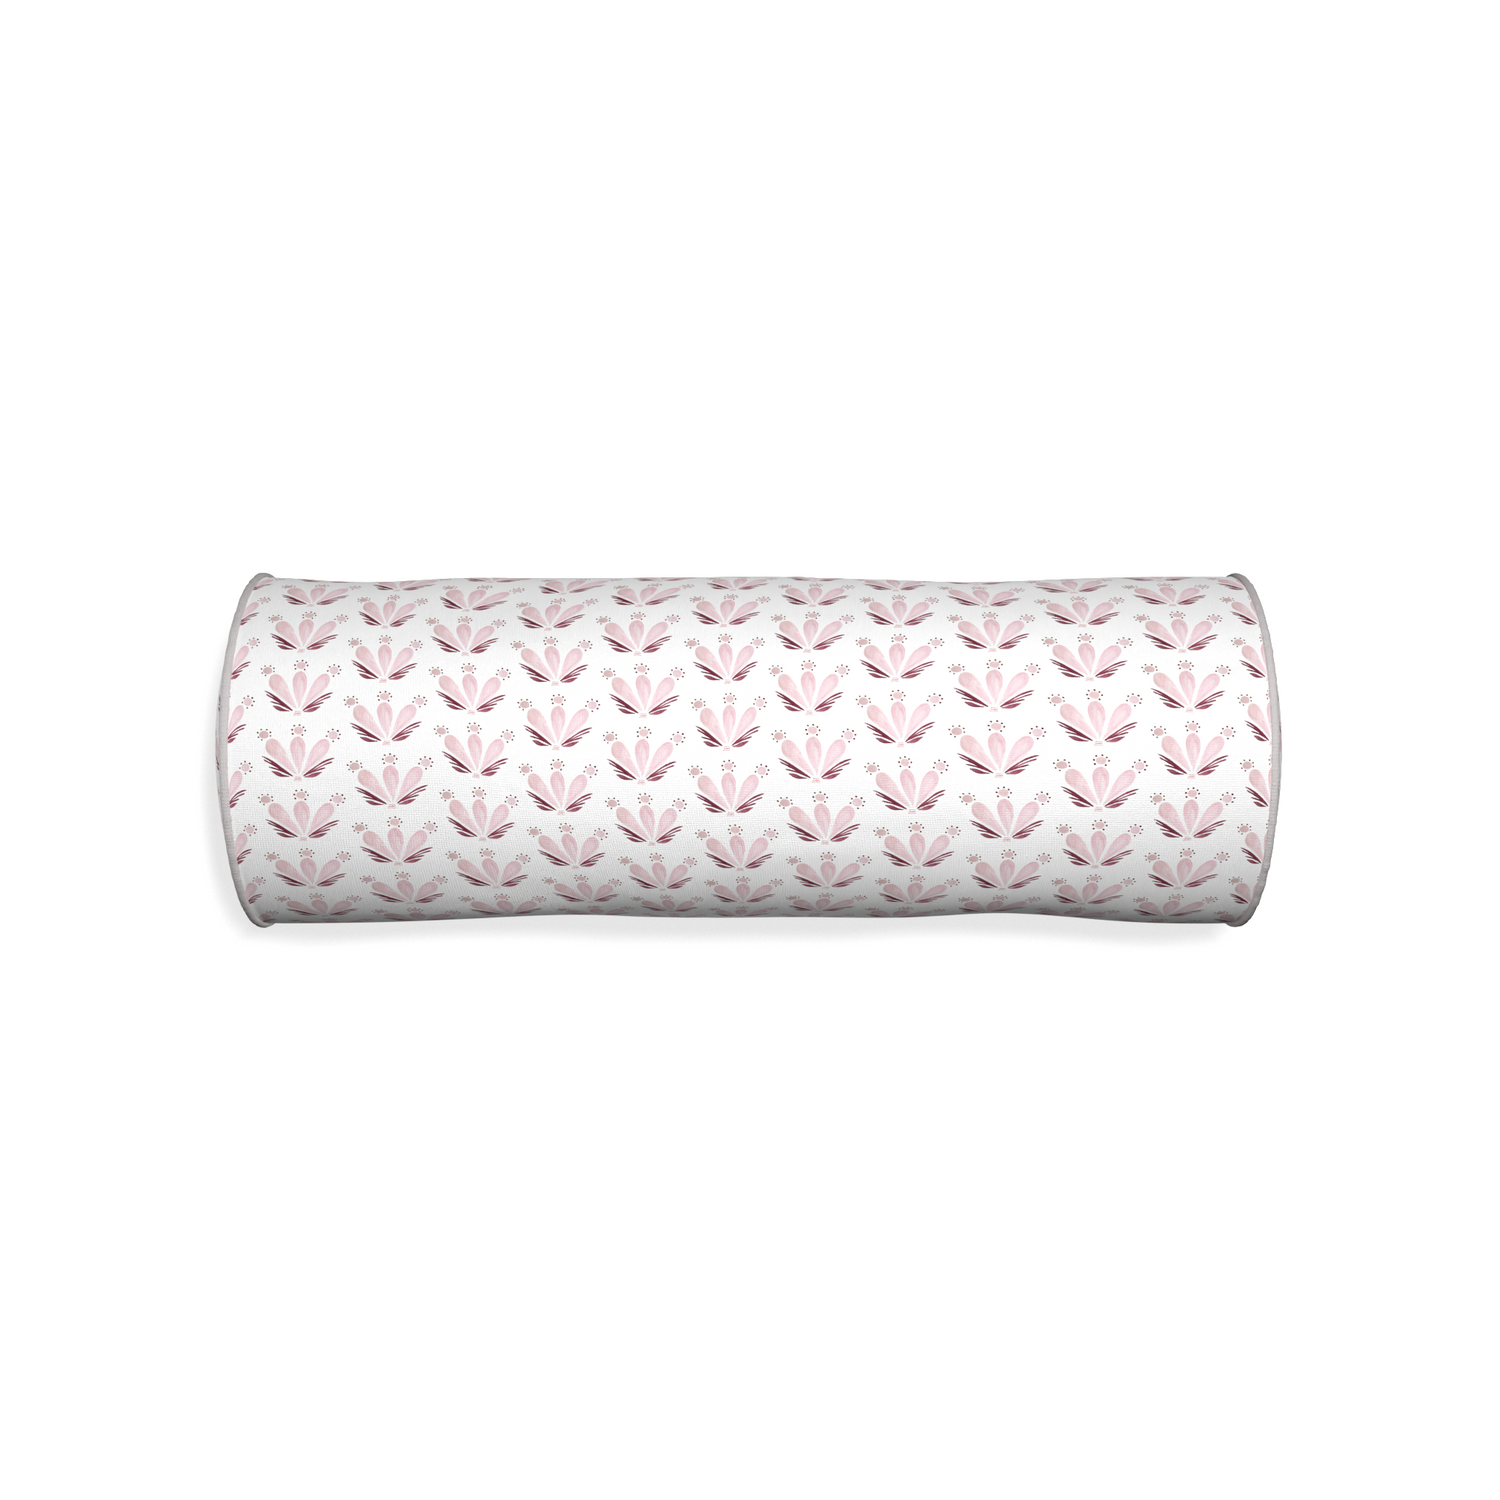 Bolster serena pink custom pink & burgundy drop repeat floralpillow with pebble piping on white background